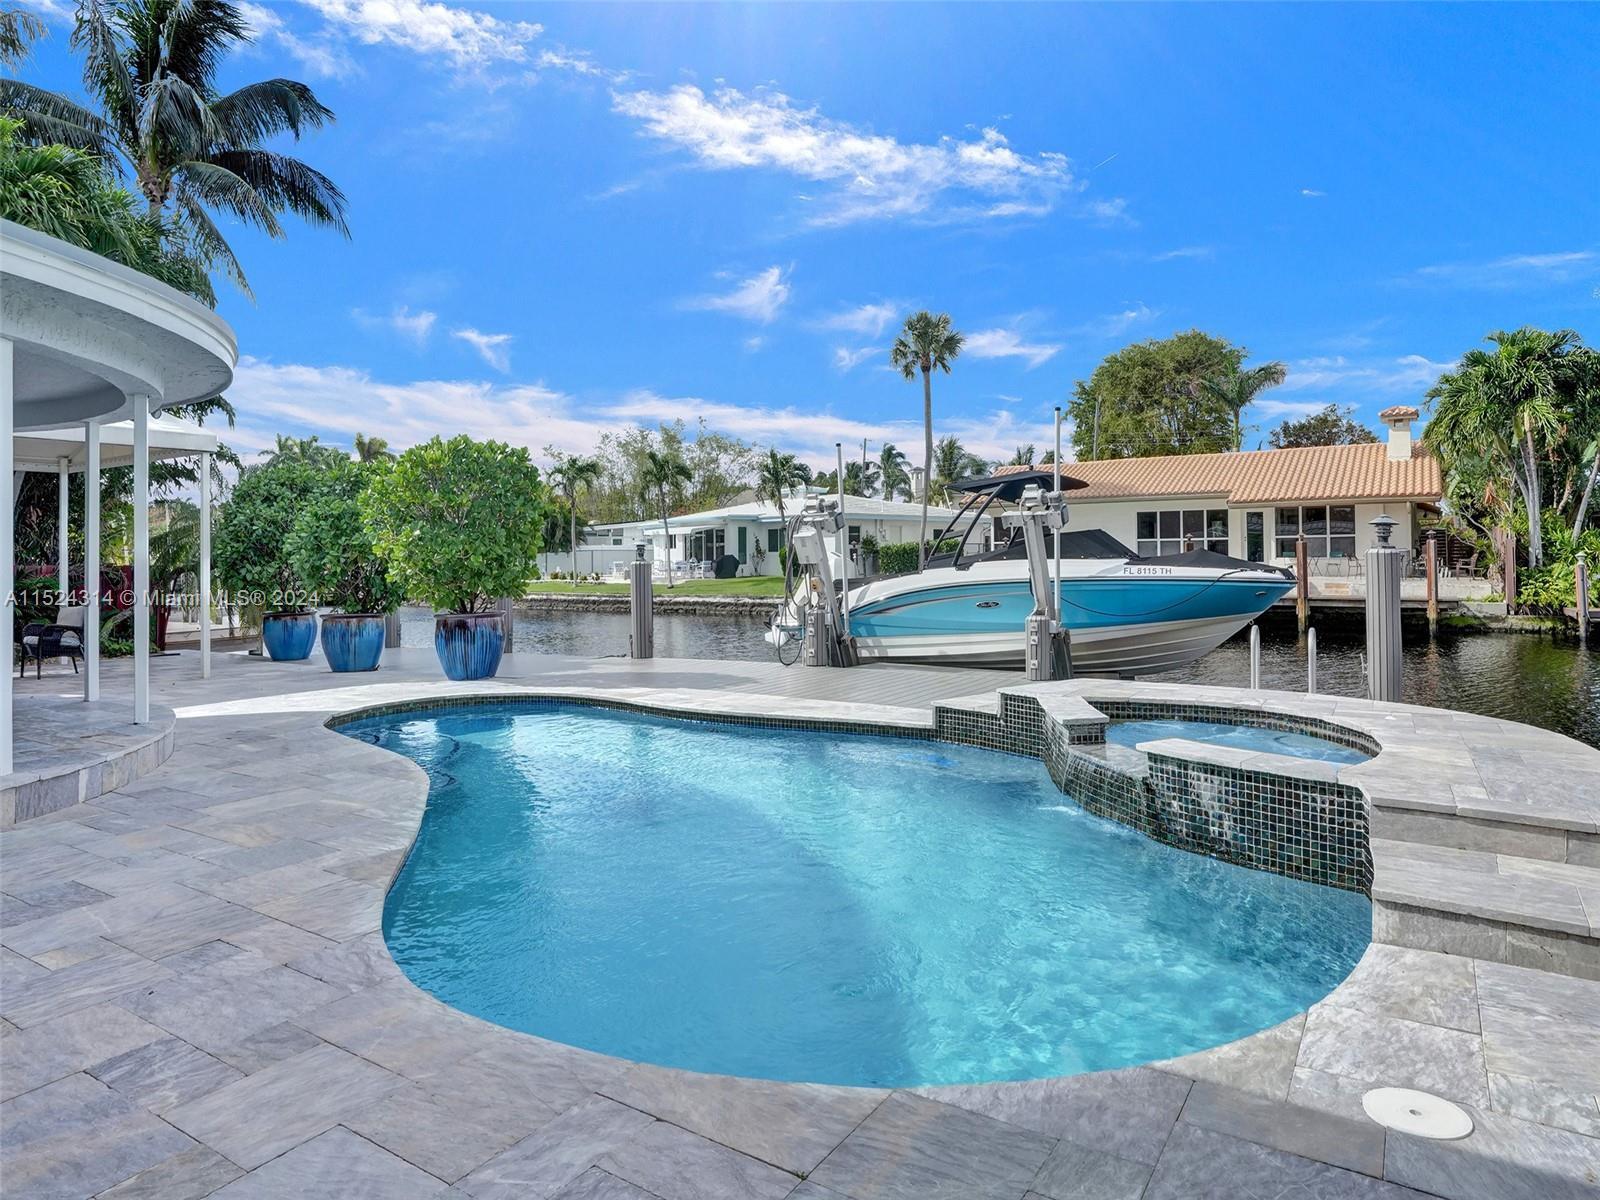 Embrace waterfront serenity in this stunning pool home nestled at the end of a private cul-de-sac in